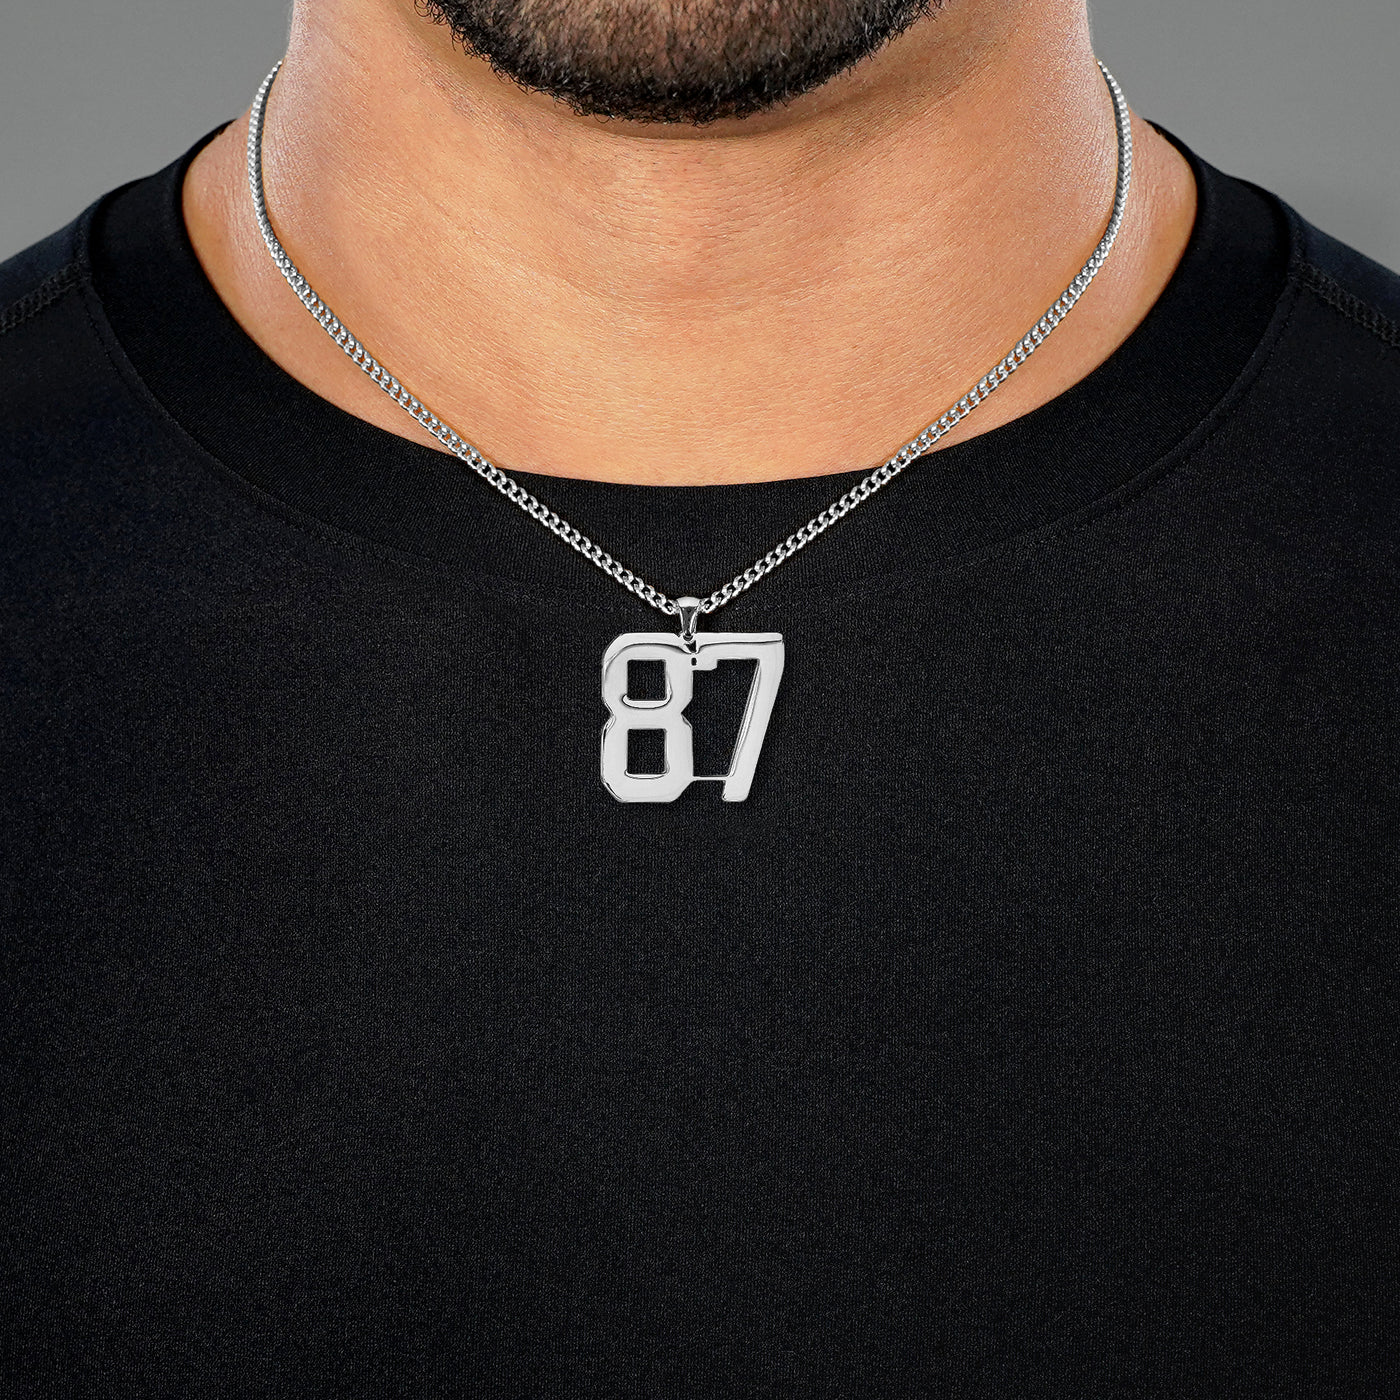 87 Number Pendant with Chain Necklace - Stainless Steel